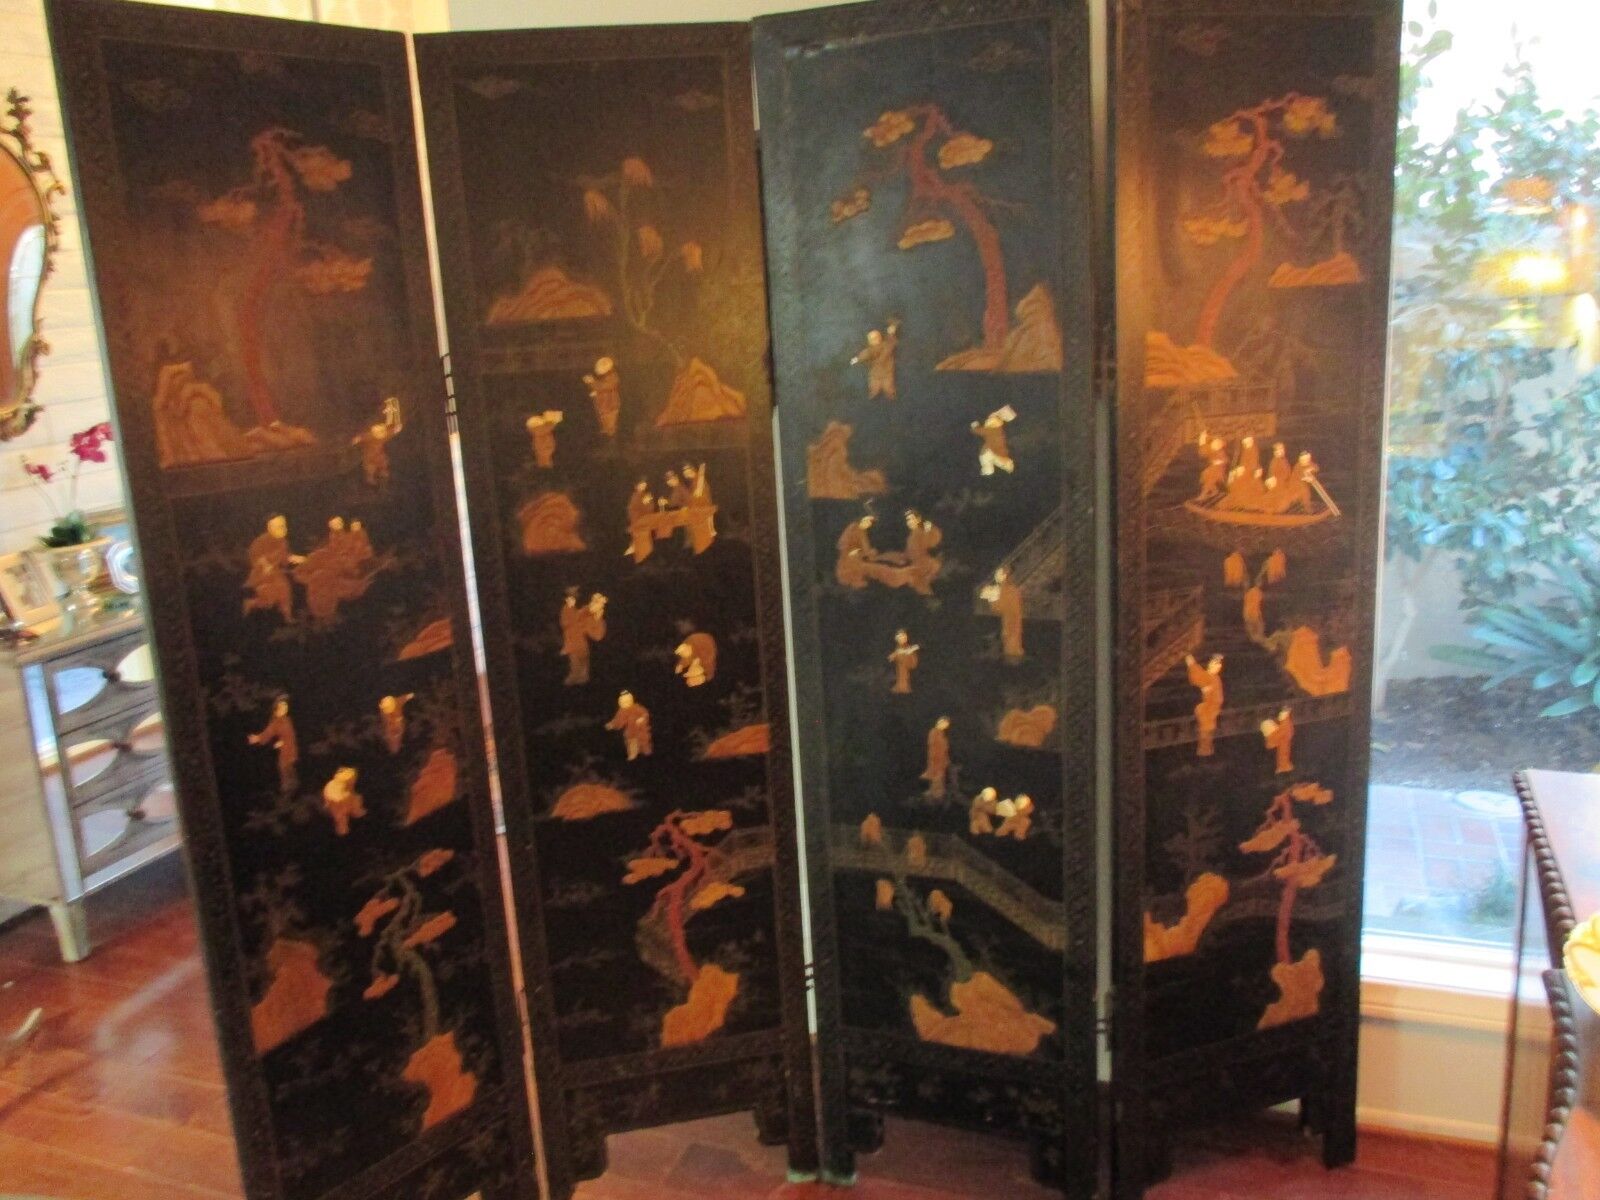 ANTIQUE CHINESE BLACK LACQUER SCREEN Mother of Pearl-EXQUISITE! RARE19th C. Без бренда - фотография #4